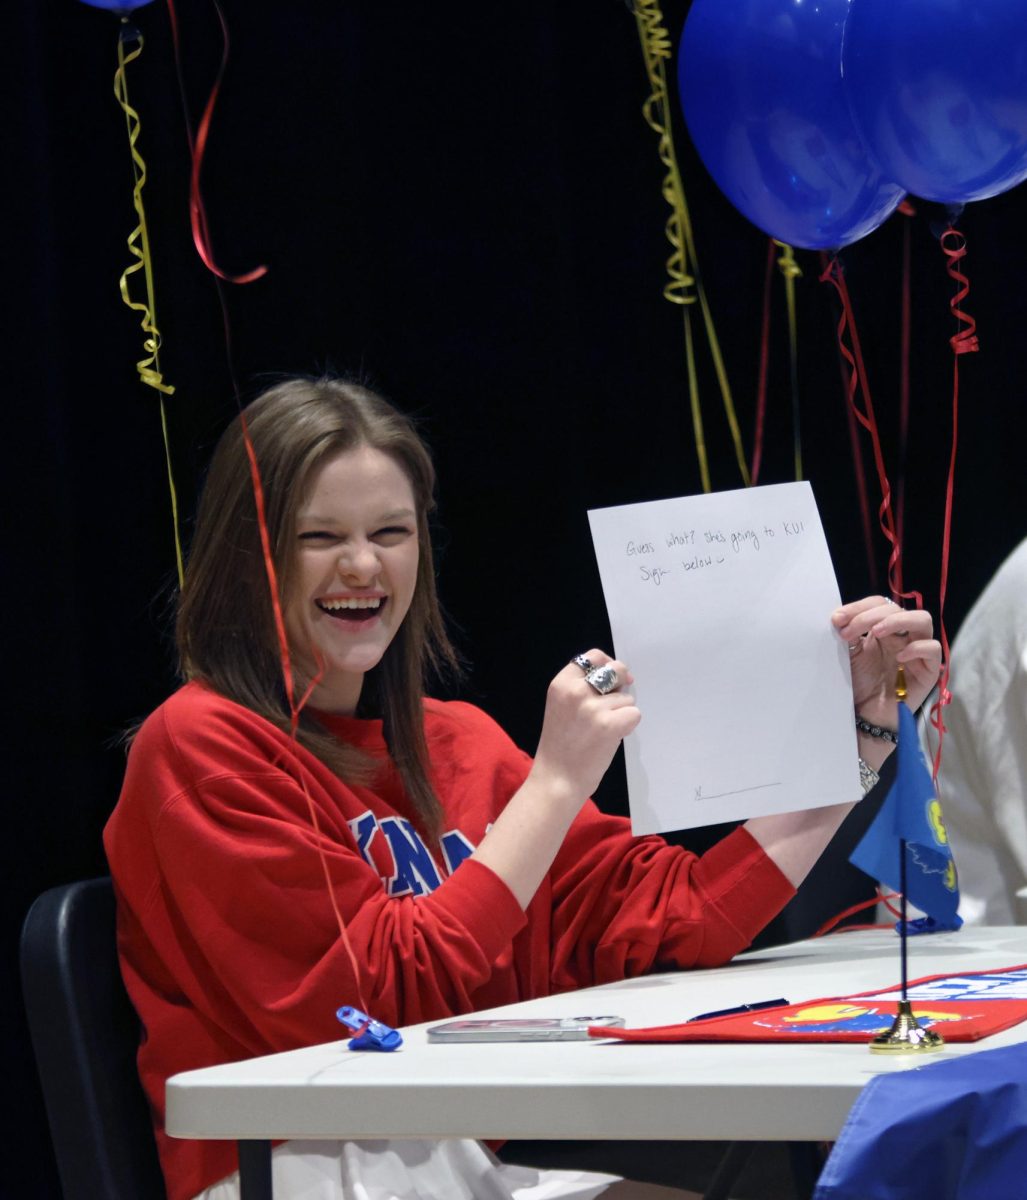 Laughing, senior Caroline Alley holds up her paper to sign.